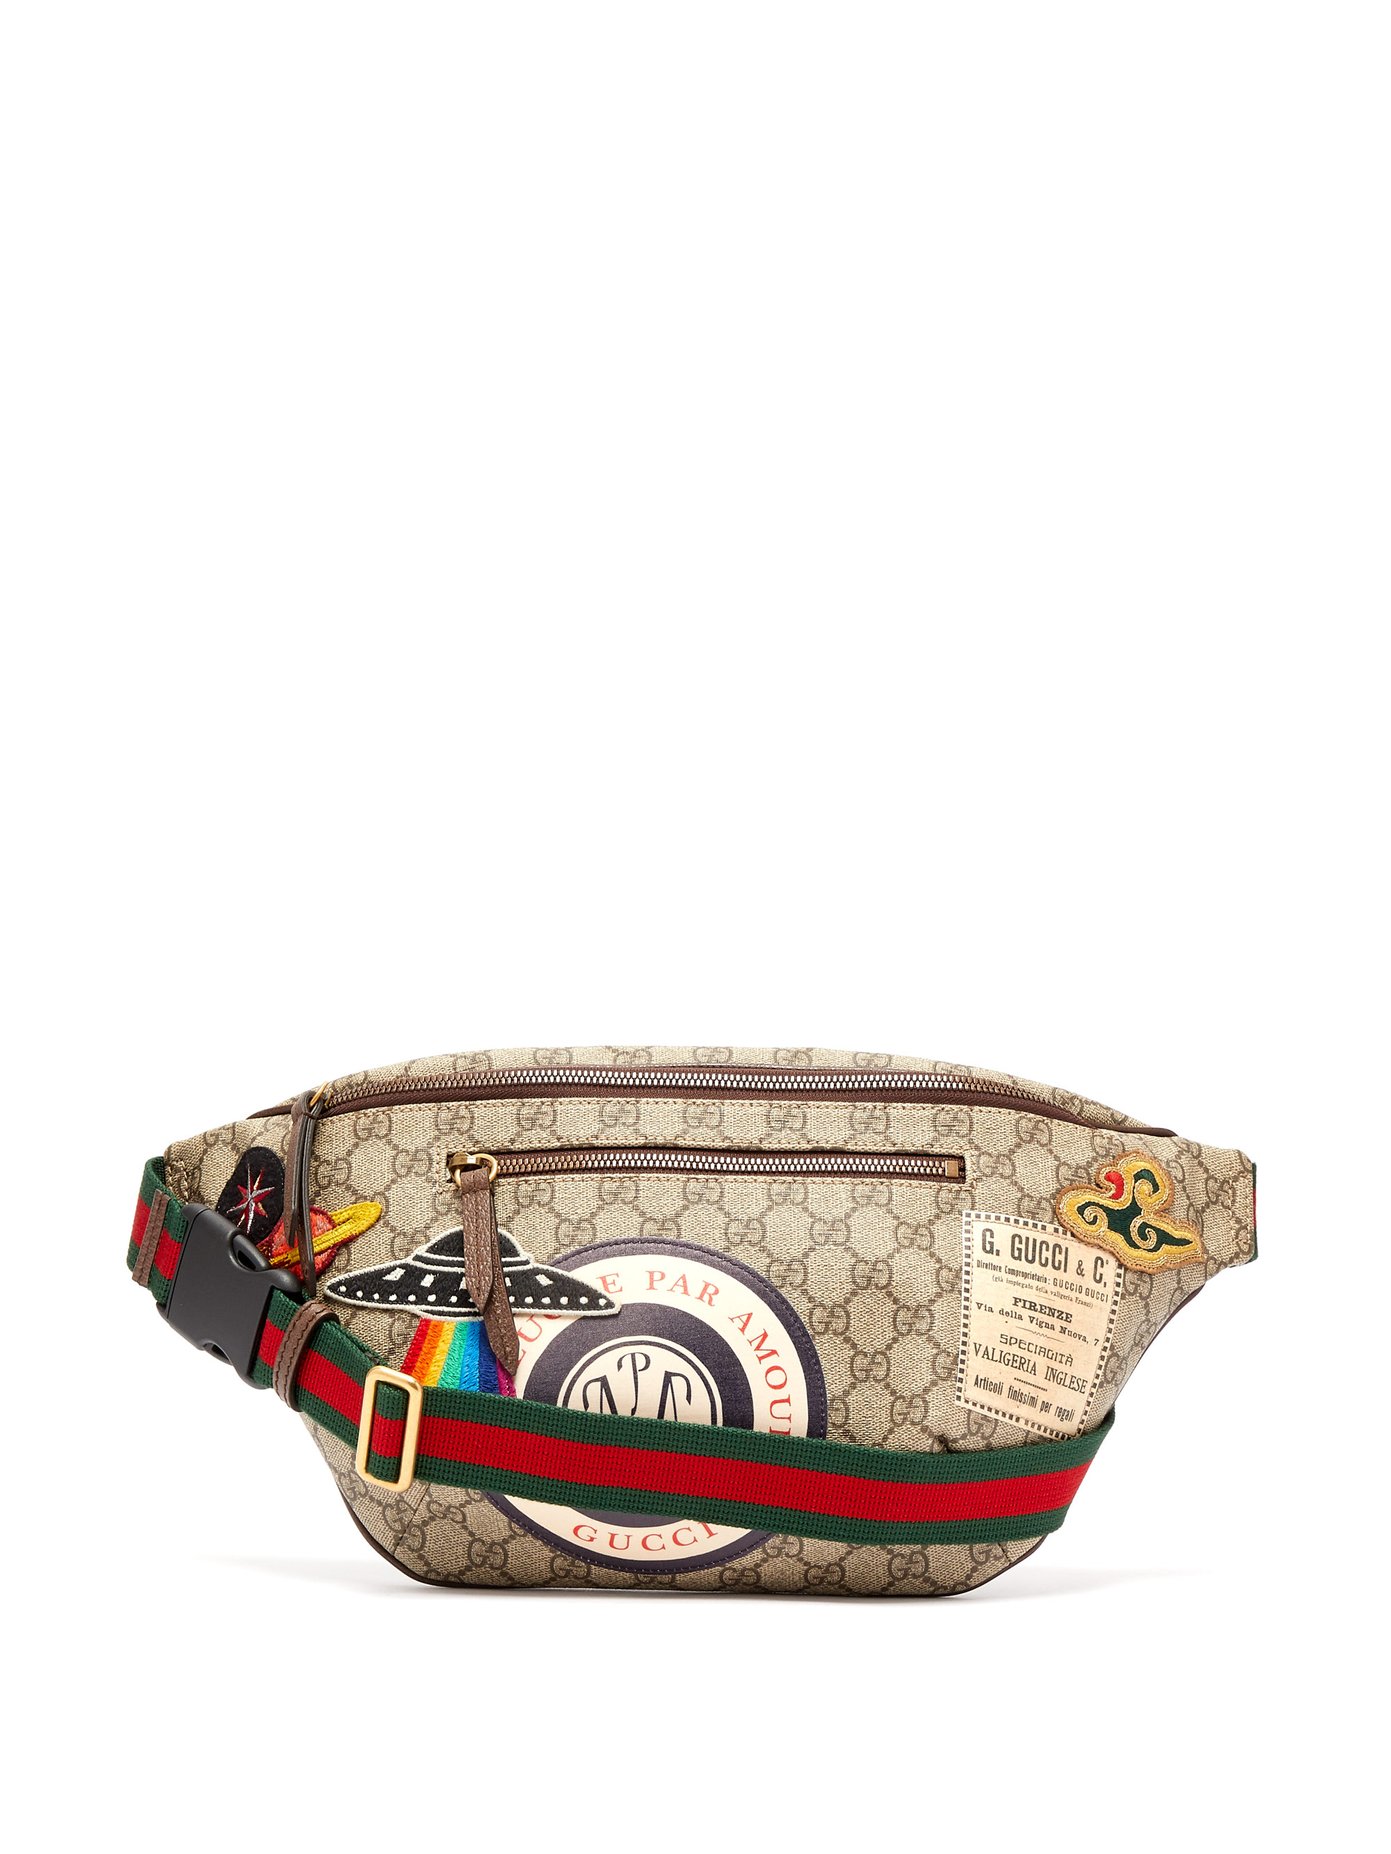 Gucci Courrier Gg Supreme Outlet